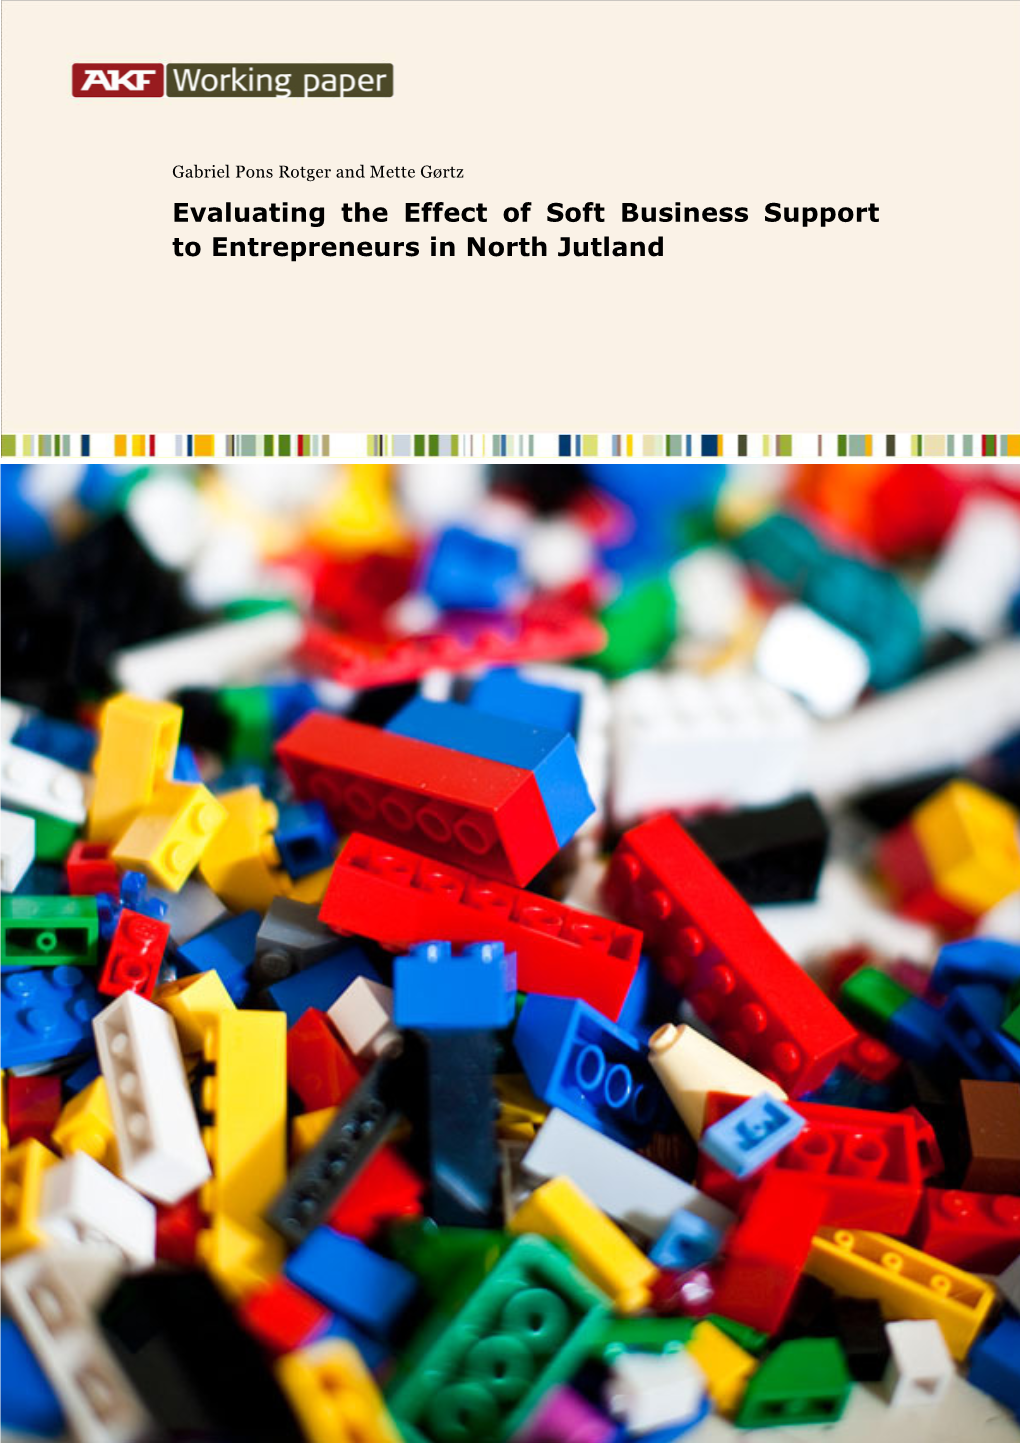 Evaluating the Effect of Soft Business Support to Entrepreneurs in North Jutland